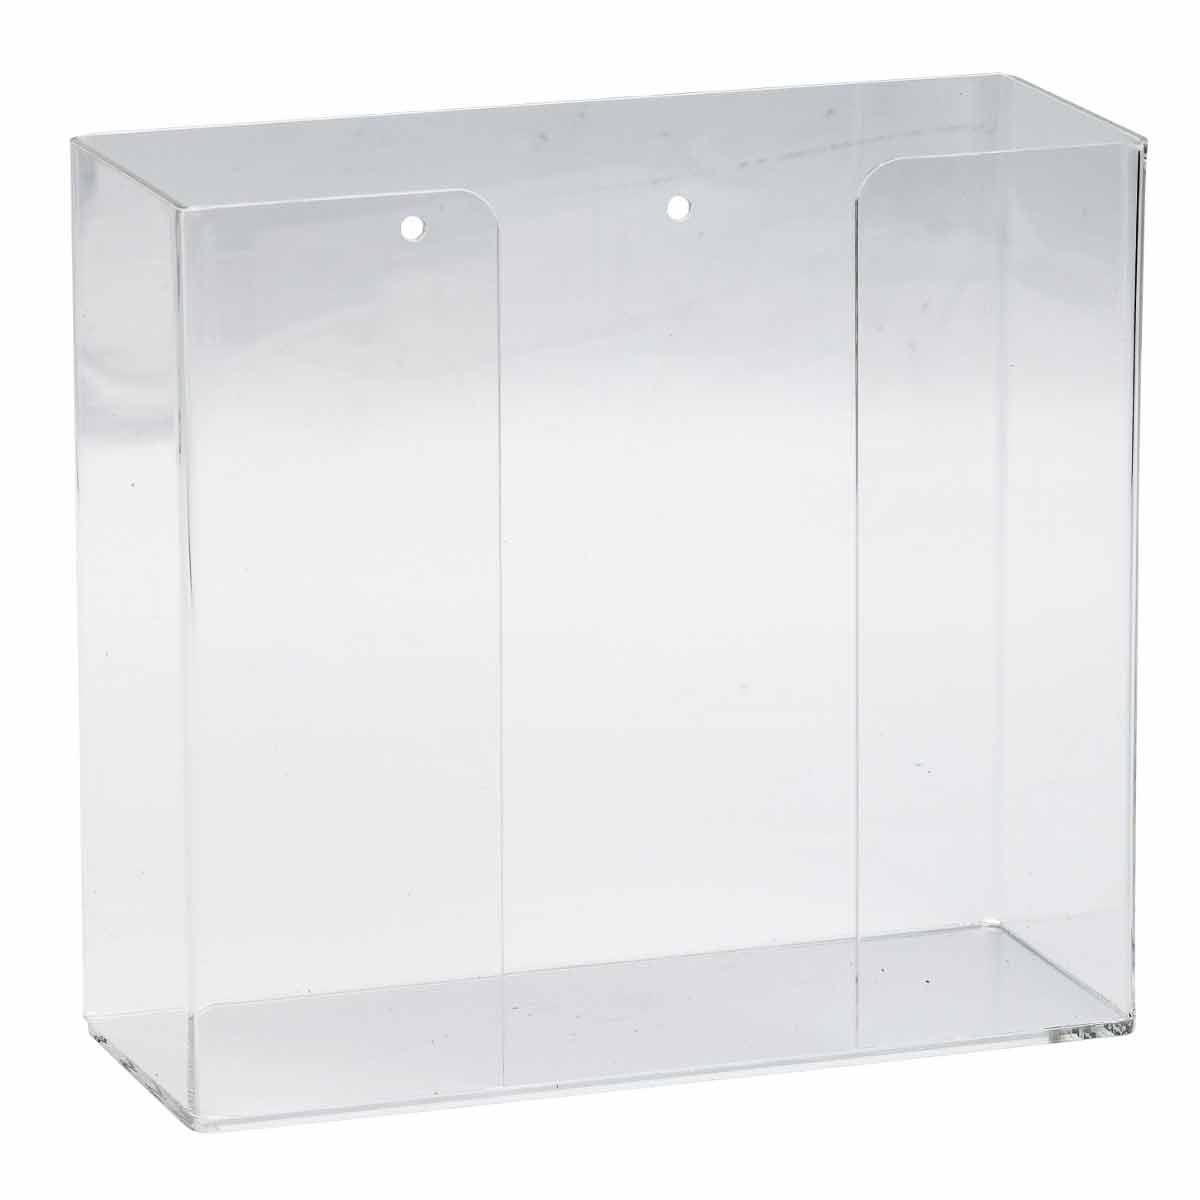 Brady® GD01 1-Box Glove Dispenser, 1 Compartment, Surface/Wall Mount, Hinged Top Dispensing, Acrylic Glass, Clear